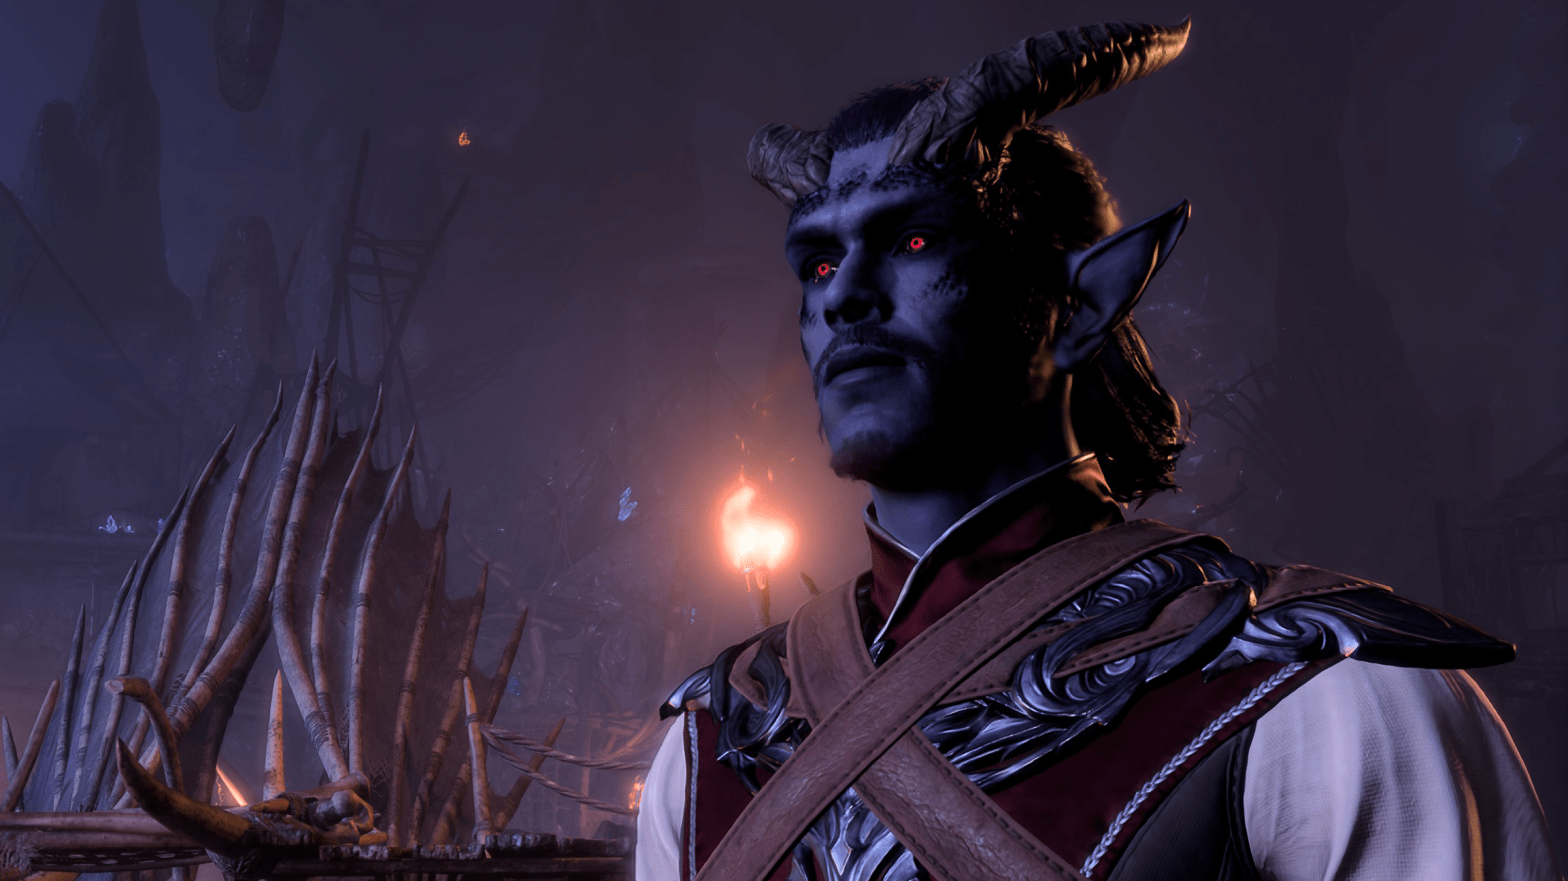 Say hello to my Tiefling draconic bloodline sorcerer, before he shatters you to death. (Screenshot: Larian Studios)